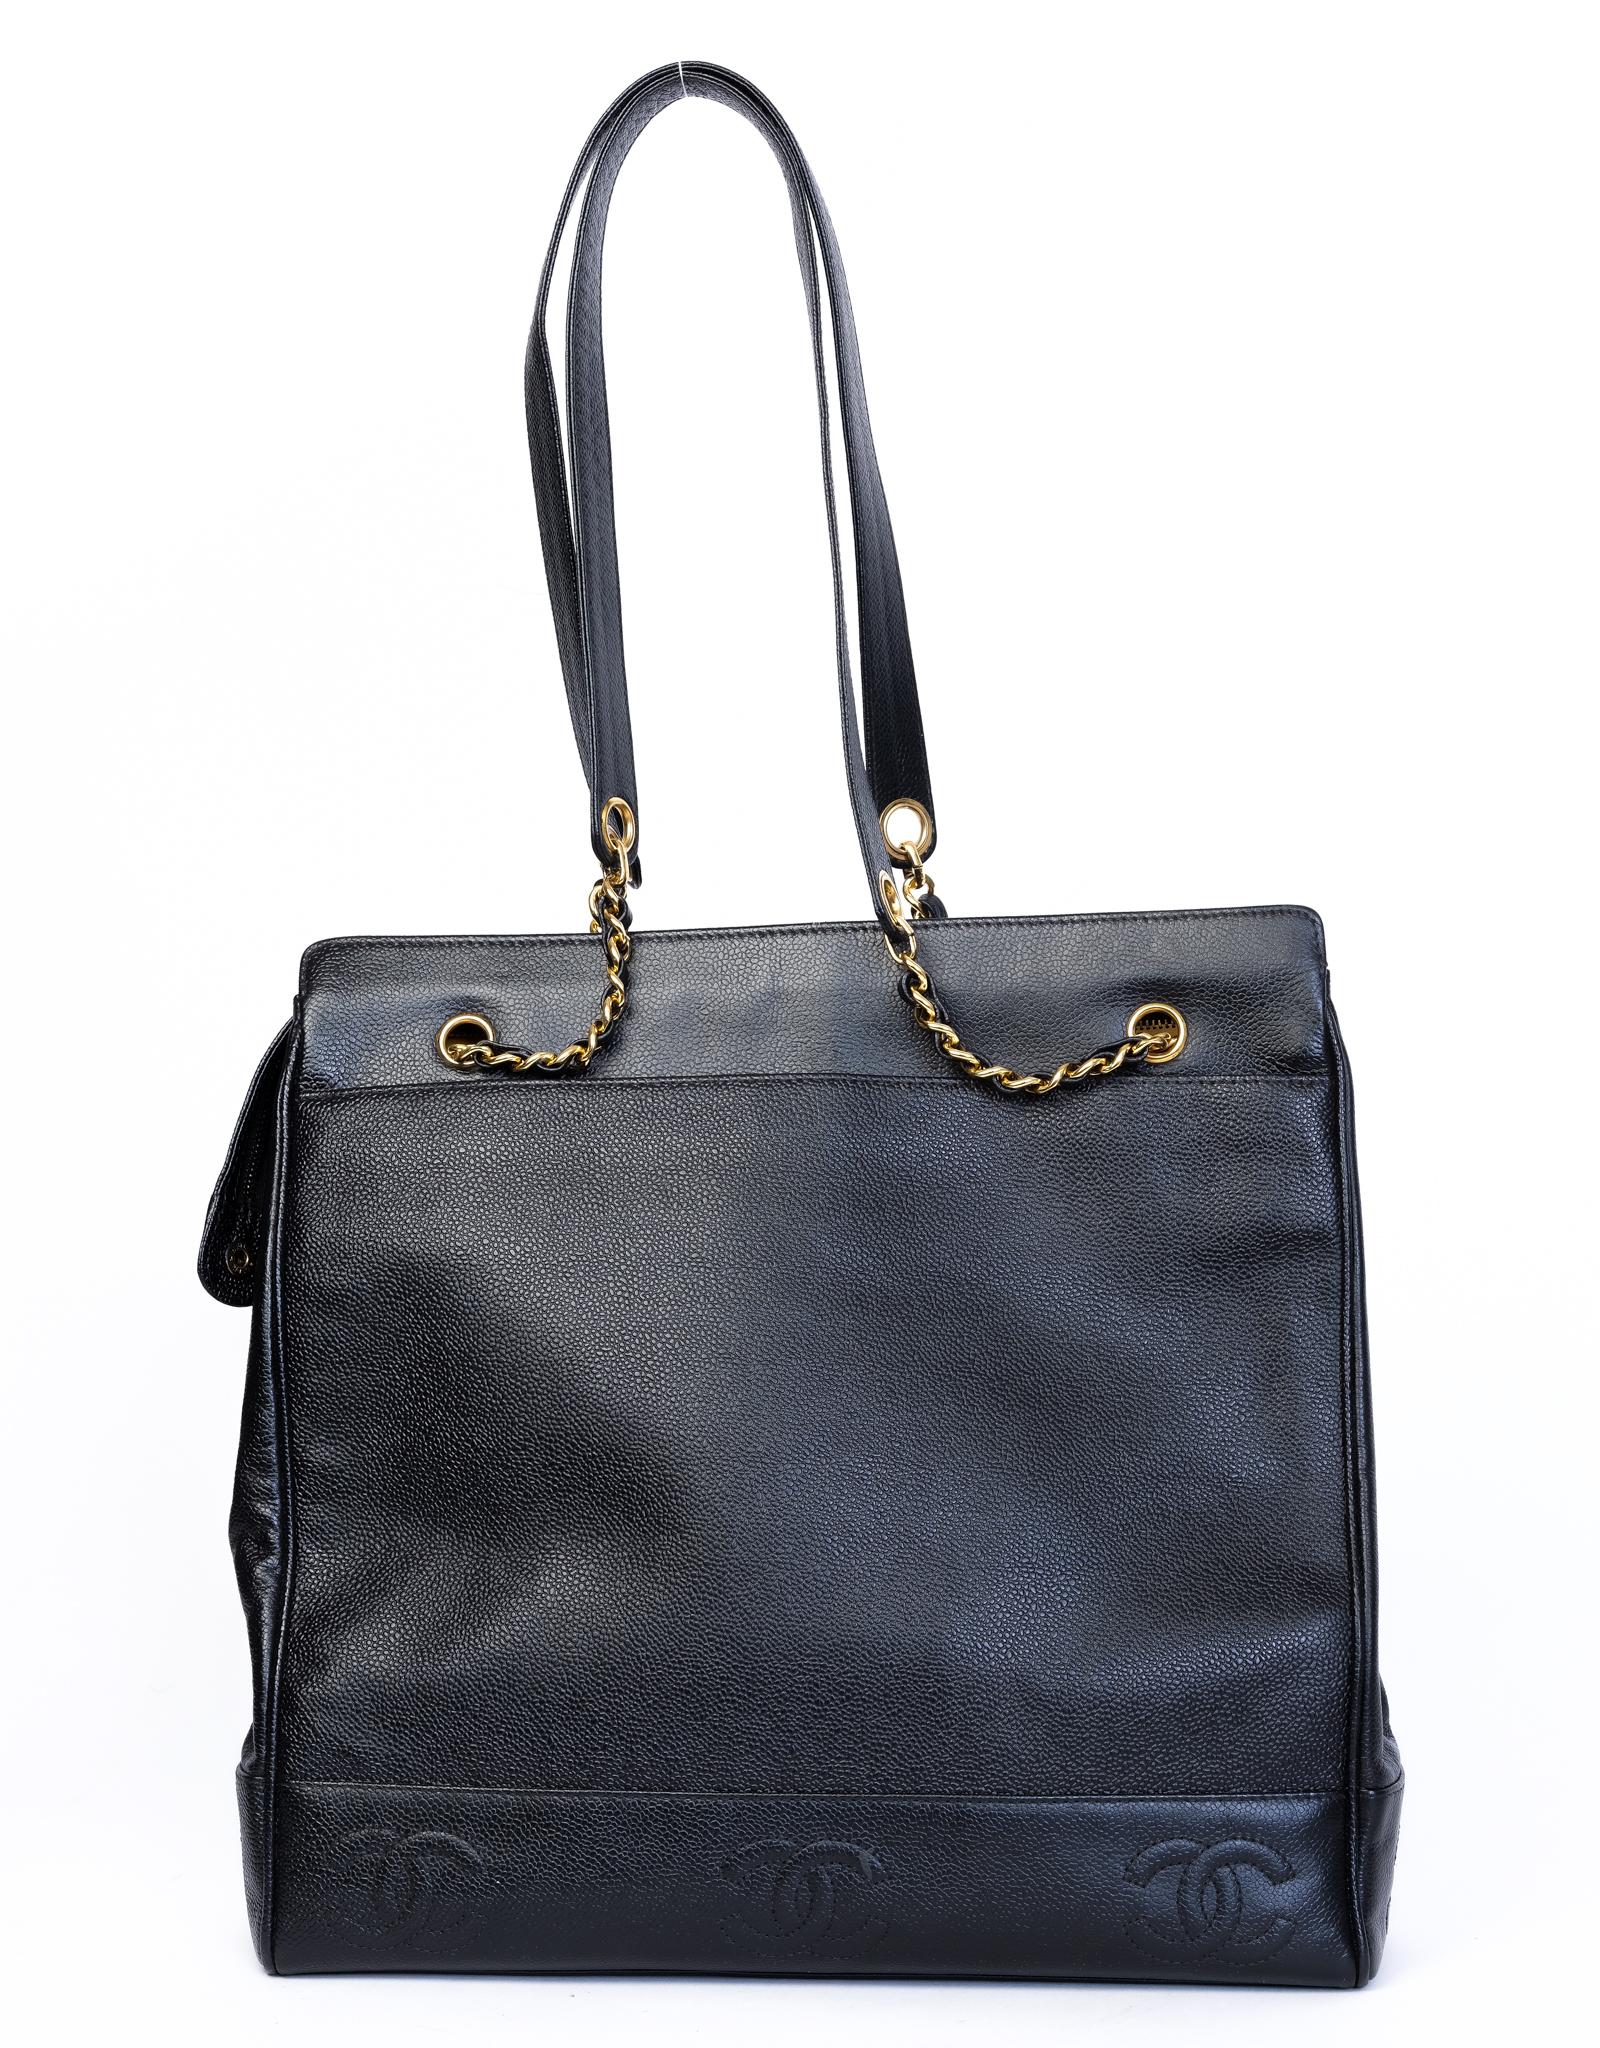 This Vintage Leather Triple Coco Shopping Bag Tote from the 1990’s is crafted in black leather. Featuring a triple interlocking CC logo embroidered on the front, a gold toned chain interlaced with leather connected to a leather strap with a top